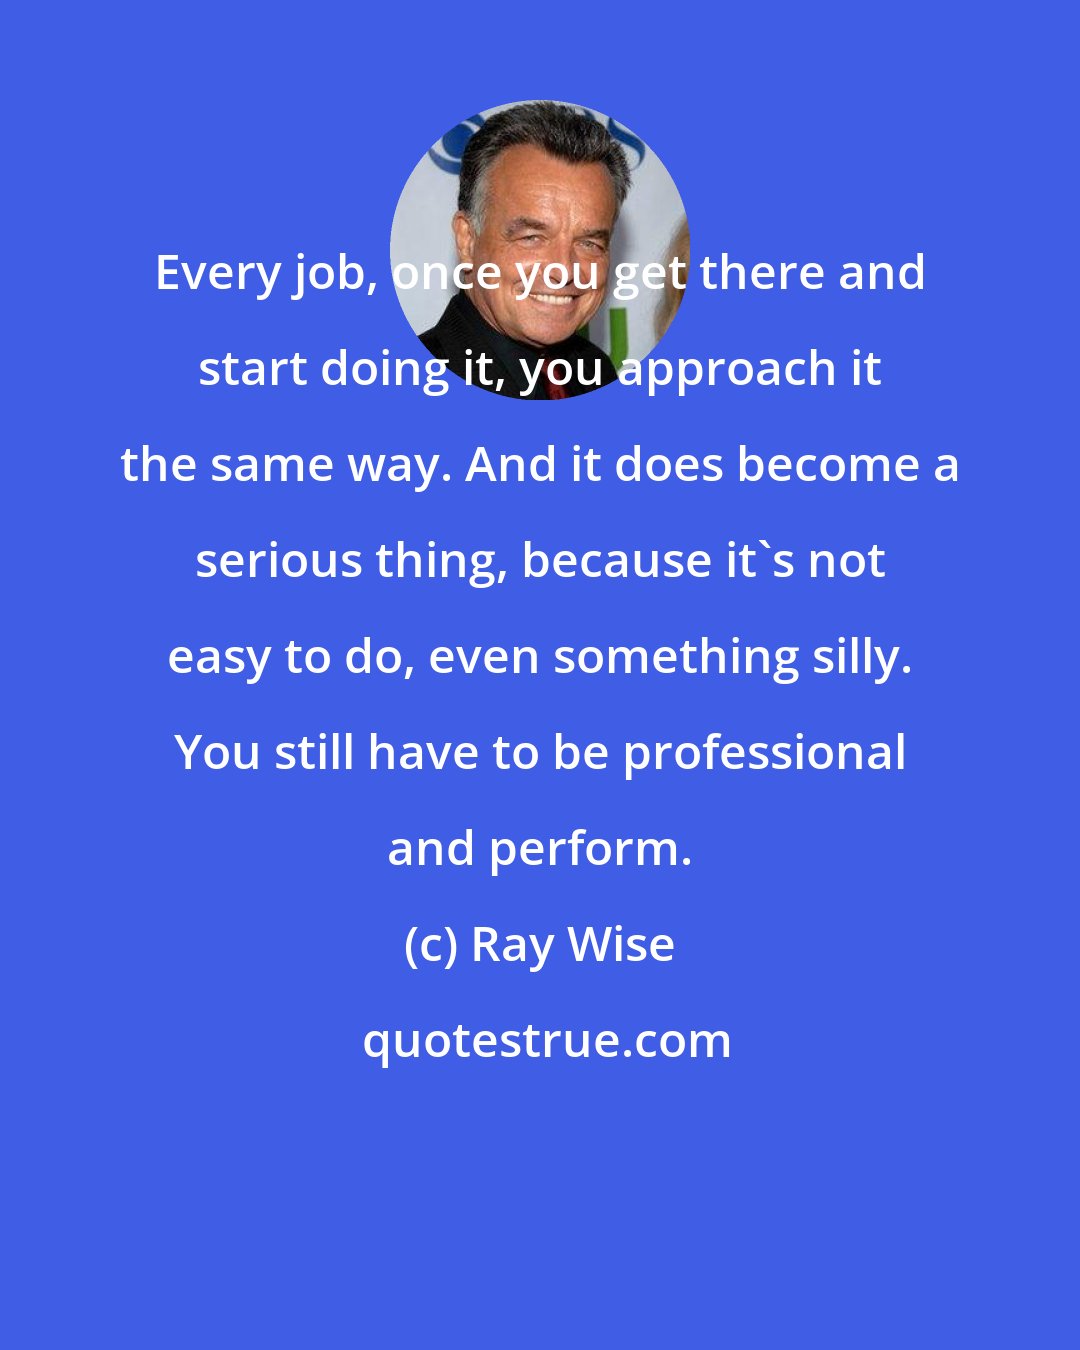 Ray Wise: Every job, once you get there and start doing it, you approach it the same way. And it does become a serious thing, because it's not easy to do, even something silly. You still have to be professional and perform.